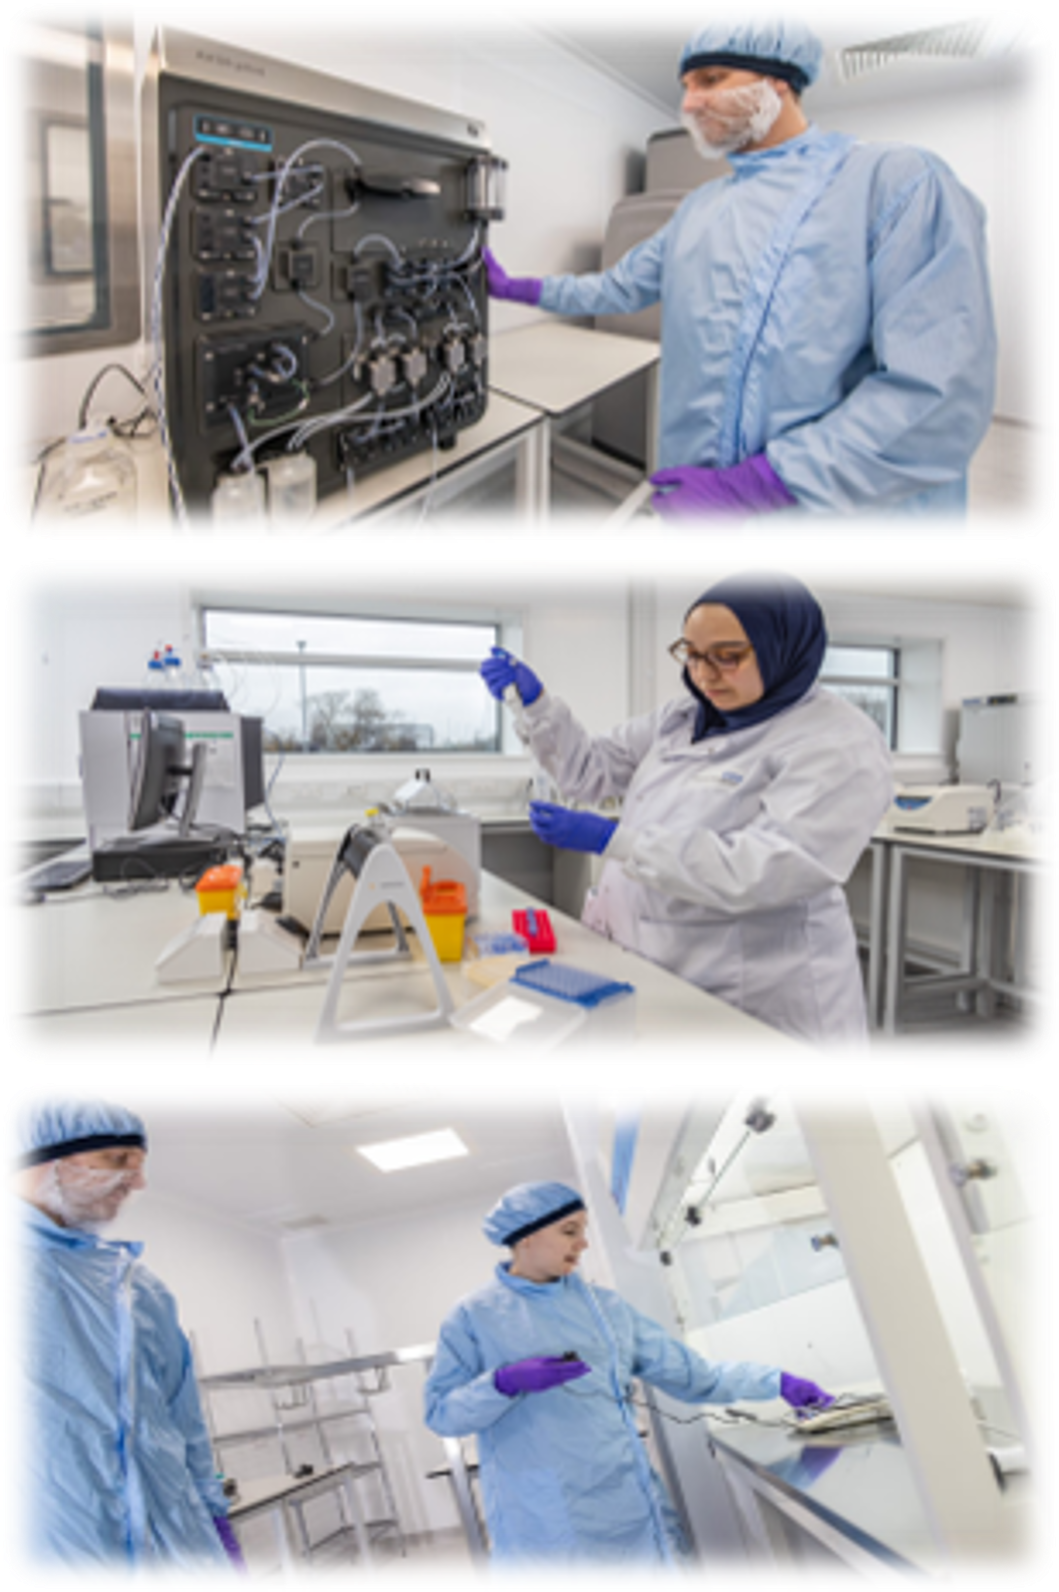 Images of CBC staff in clean room and laboratory space